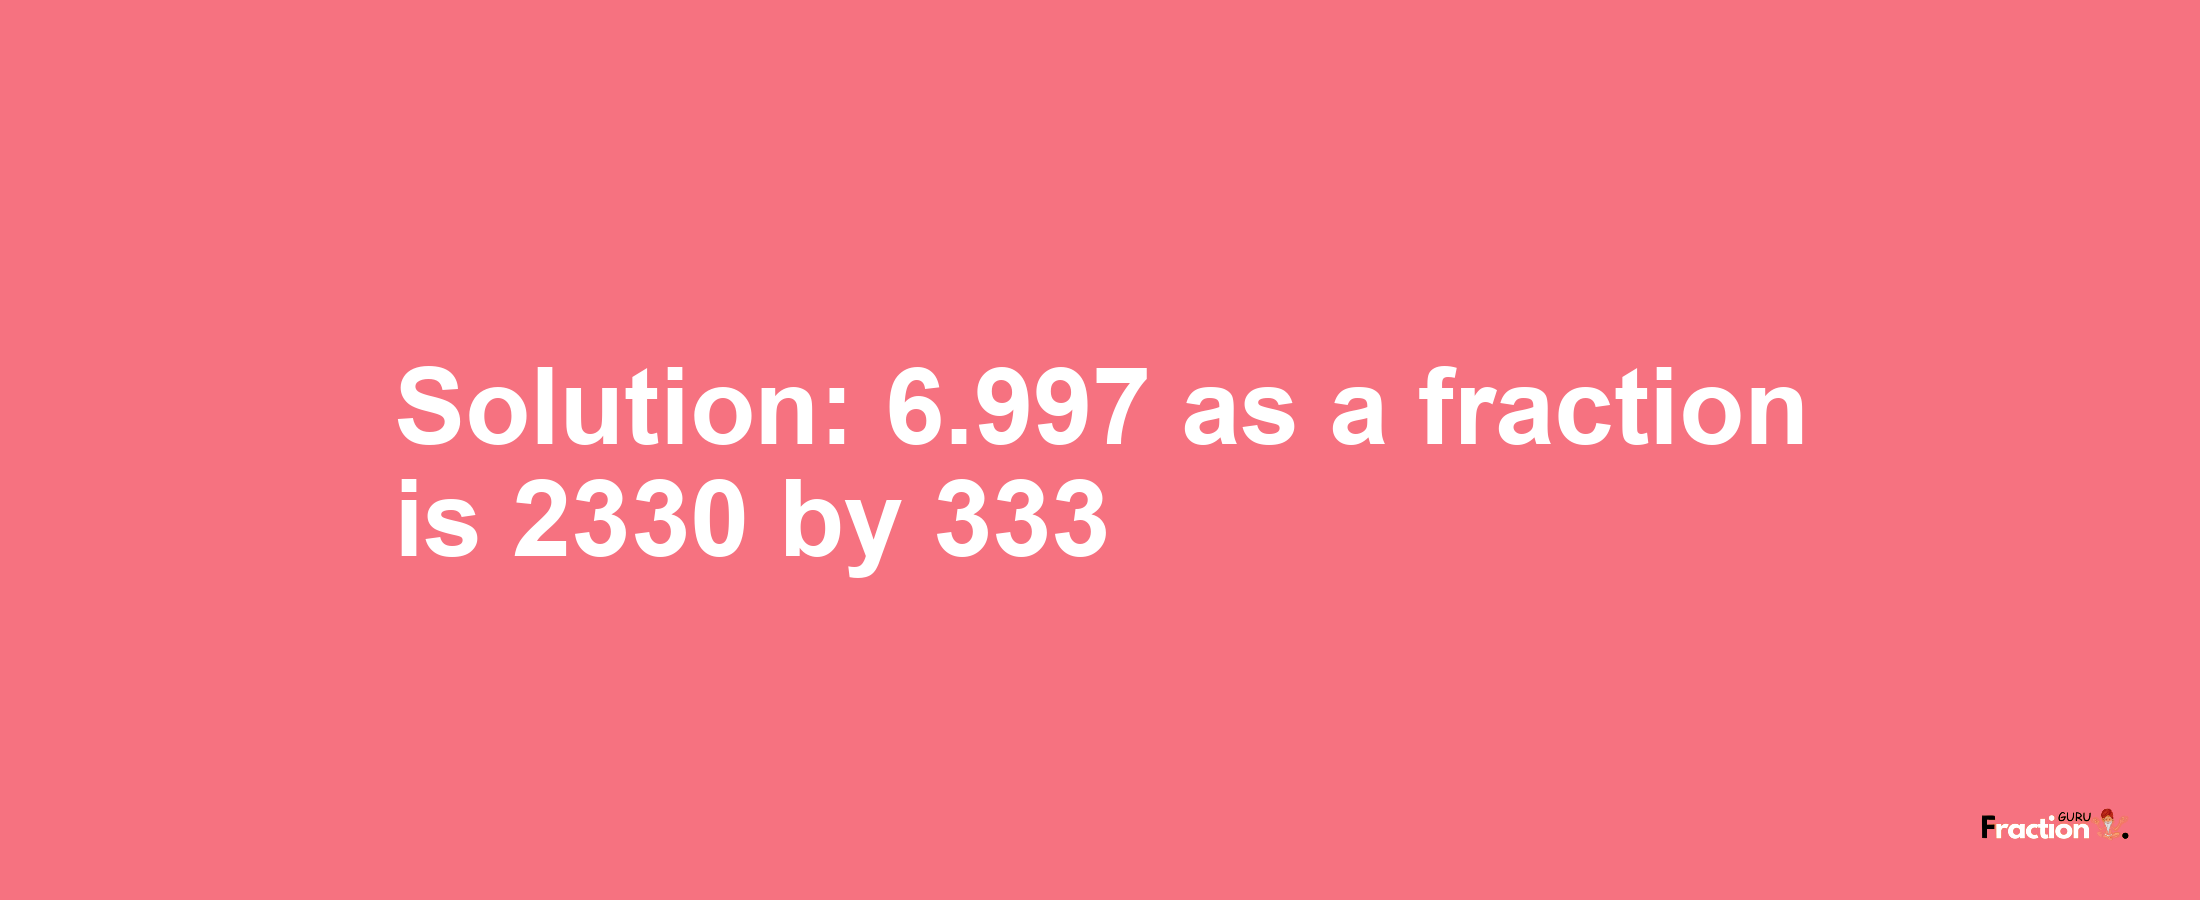 Solution:6.997 as a fraction is 2330/333